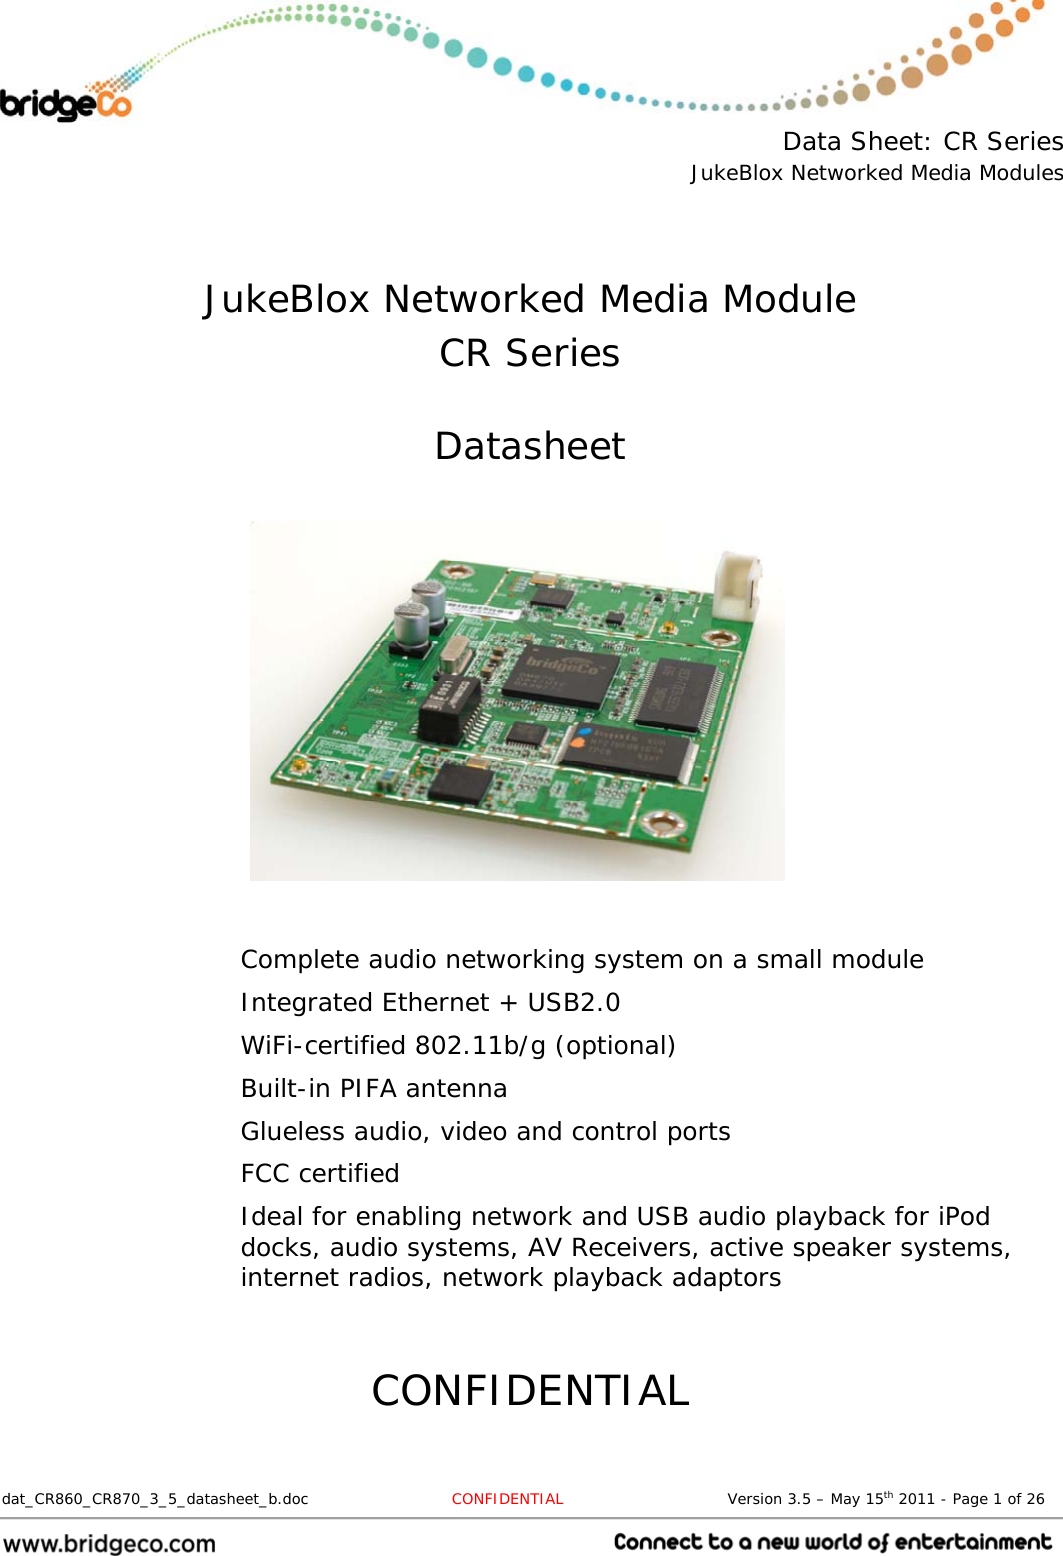  Data Sheet: CR Series JukeBlox Networked Media Modules  dat_CR860_CR870_3_5_datasheet_b.doc   CONFIDENTIAL                                Version 3.5 – May 15th 2011 - Page 1 of 26                                    JukeBlox Networked Media Module CR Series  Datasheet           Complete audio networking system on a small module Integrated Ethernet + USB2.0 WiFi-certified 802.11b/g (optional) Built-in PIFA antenna Glueless audio, video and control ports FCC certified Ideal for enabling network and USB audio playback for iPod docks, audio systems, AV Receivers, active speaker systems, internet radios, network playback adaptors   CONFIDENTIAL 